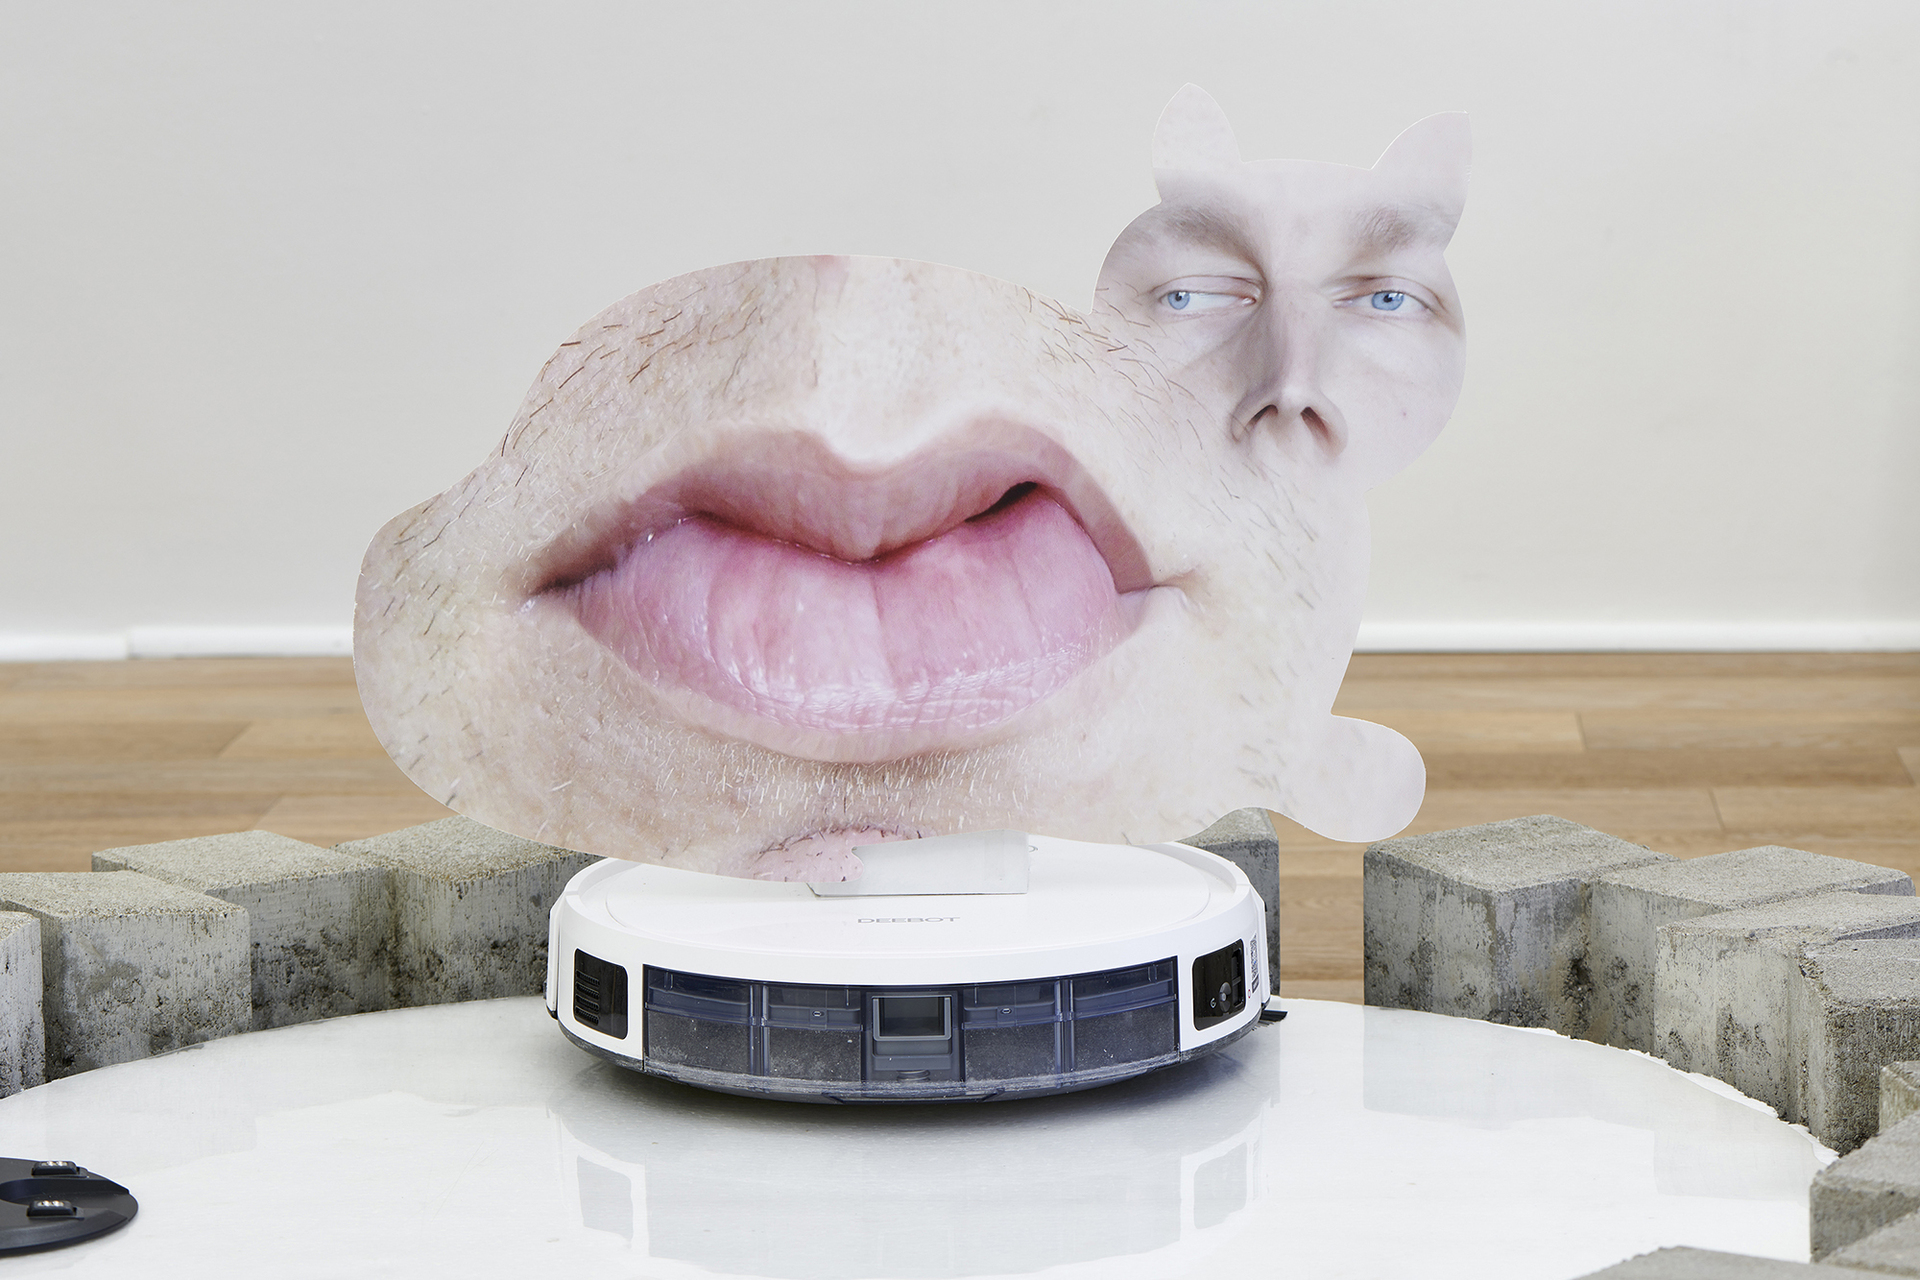 Andrey Bogush, Proposal for hoover, cat cut out and distorted face (The living web of care is not one where every giving involves taking, nor every taking will involve giving), 2020, UV print on foam board, robot hoover, styrofoam, concrete stones, transparent PVC, 51 x Ø120 cm